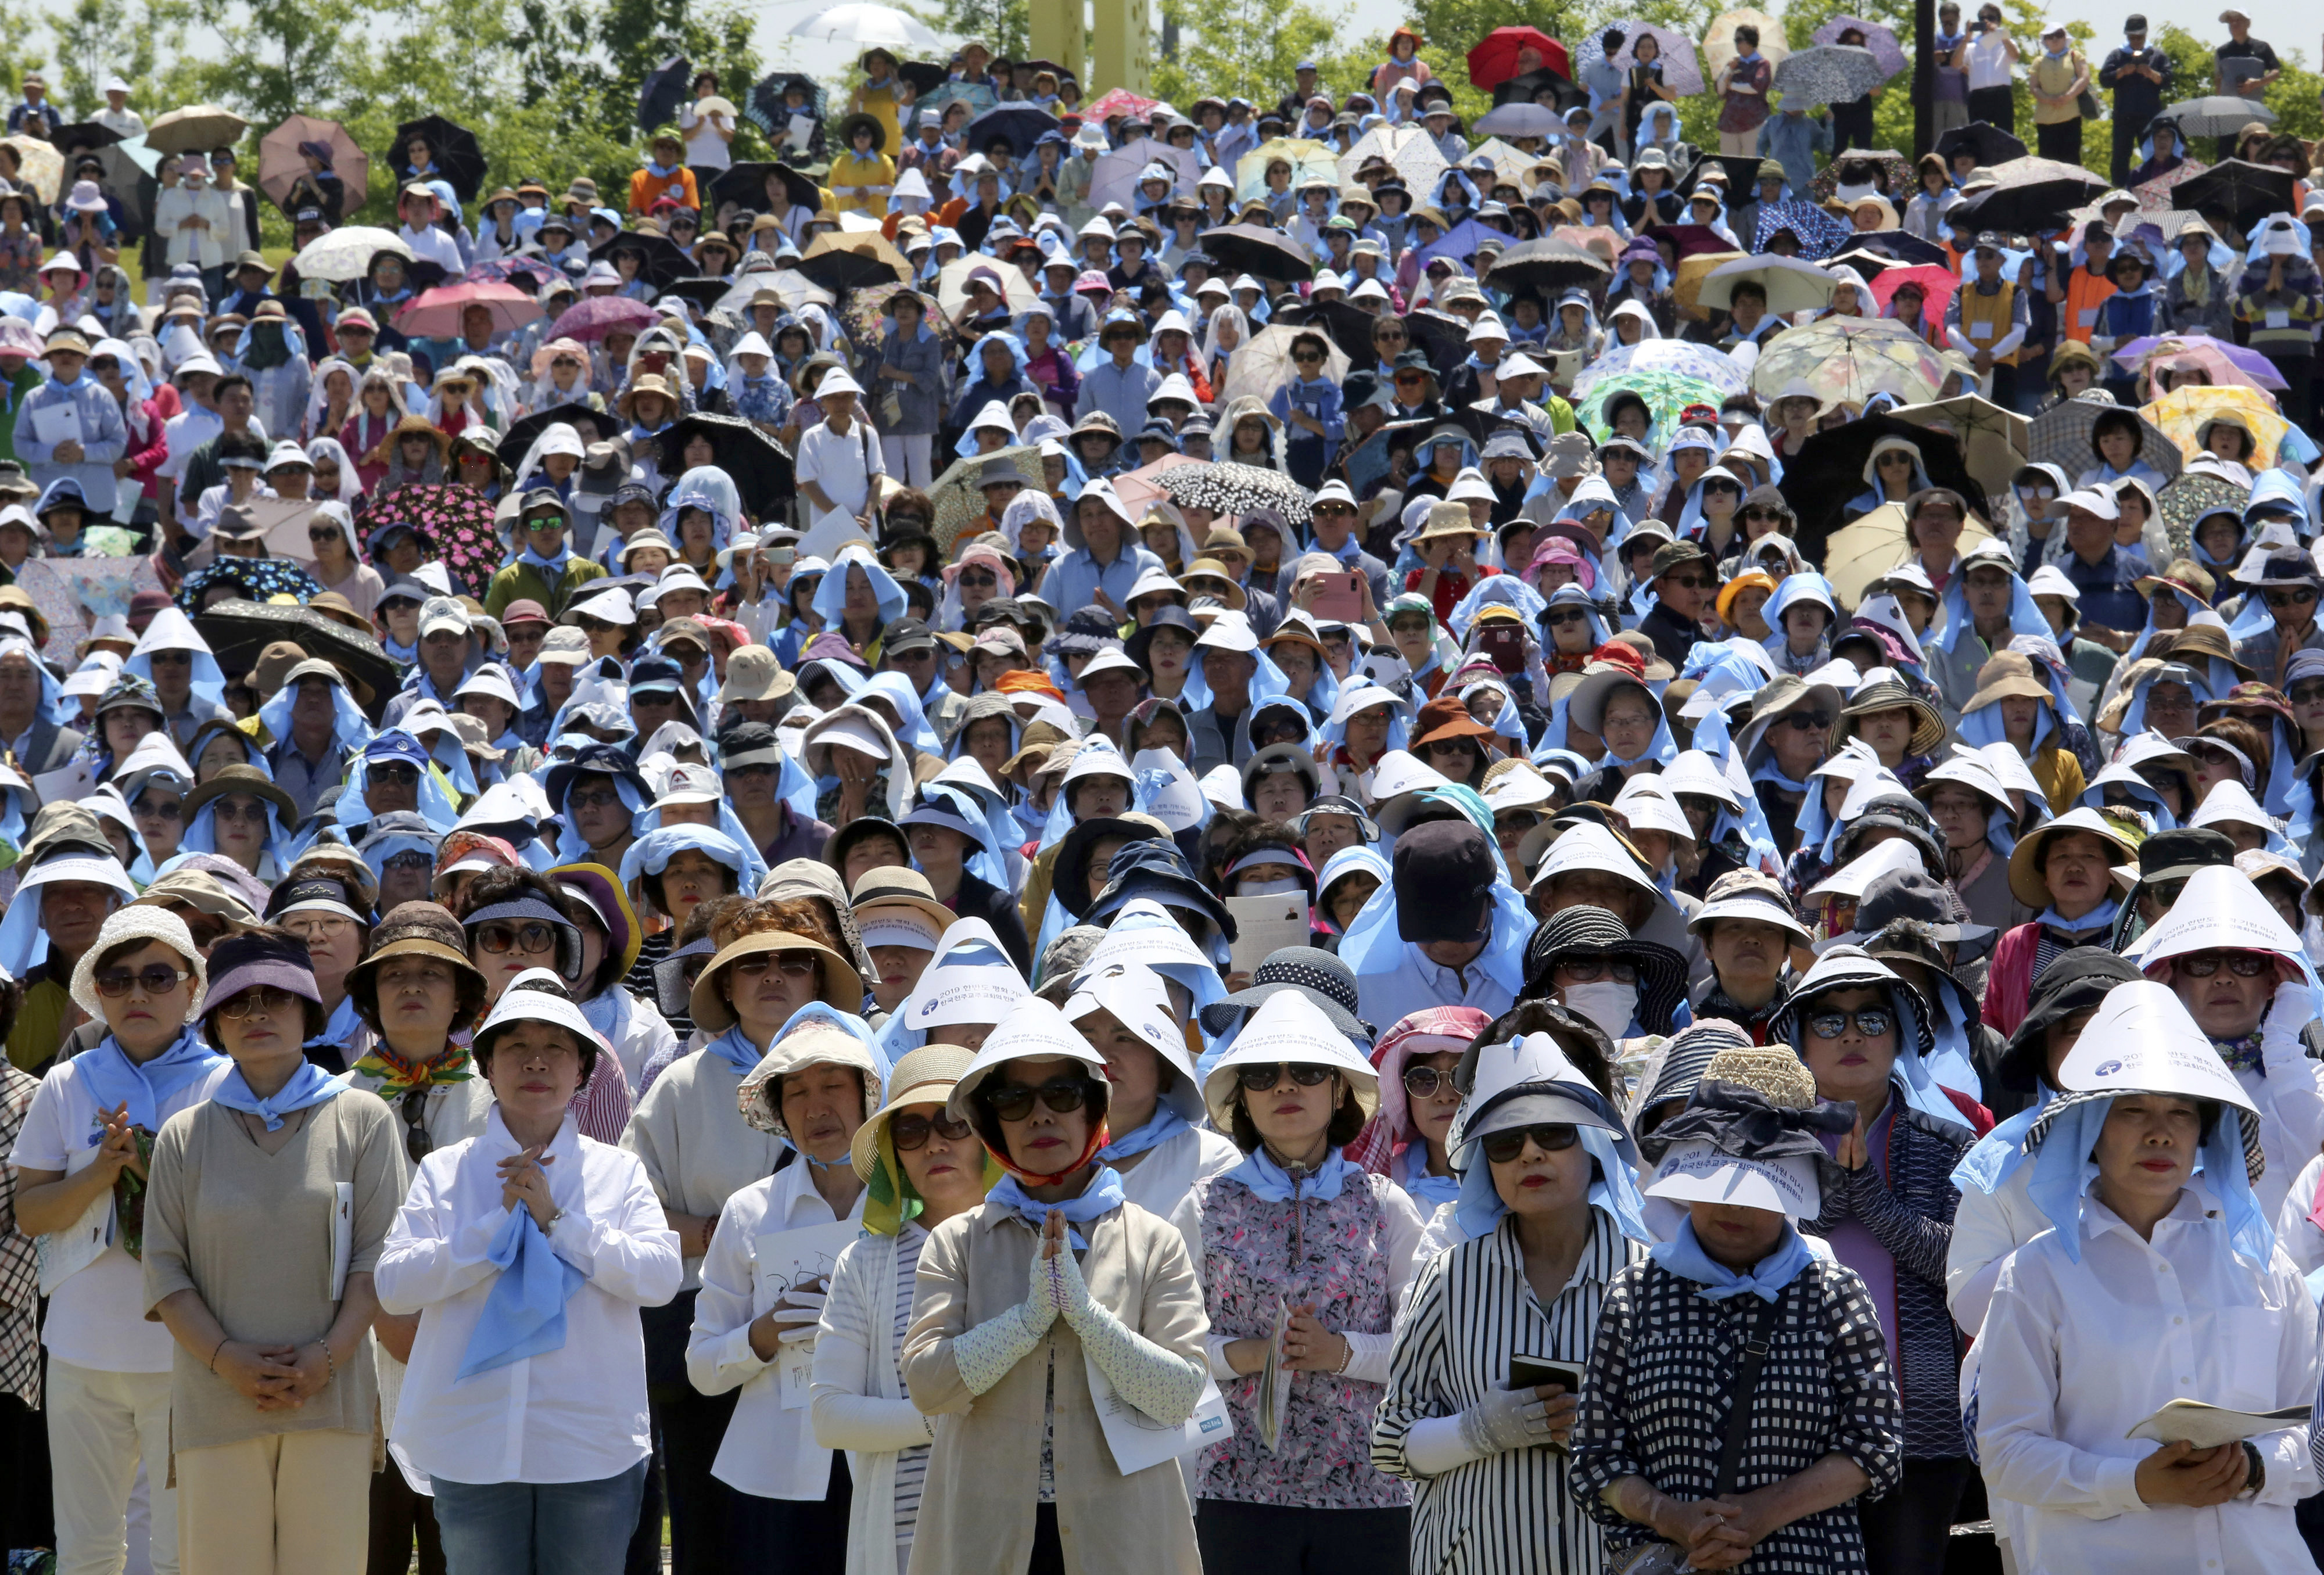 South Korean Catholic believers pray wishing for peace on the Korea peninsula during a service to mark the 69th anniversary of the outbreak of the Korean War at the Imjingak Pavilion, near the demilitarized zone of Panmunjom, in Paju, South Korea, Tuesday, June 25, 2019. South Korea and North Korea fought a devastating three-year war in the early 1950s that ended with an armistice, not a peace treaty. (AP Photo/Ahn Young-joon)